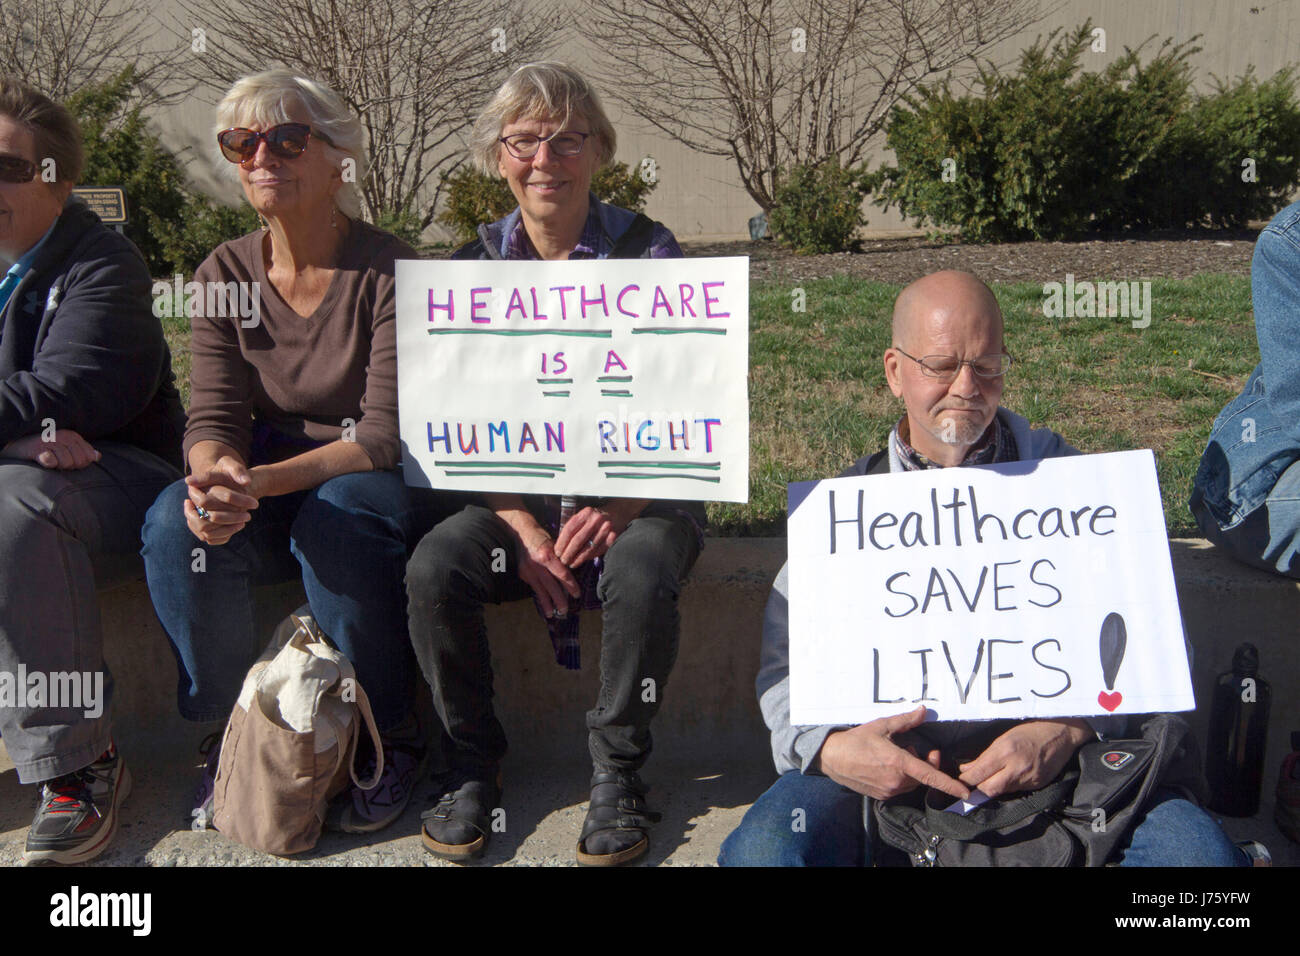 Asheville, North Carolina, USA - February 25, 2017:  Older Americans hold signs at an Affordable Care Act rally saying 'Healthcare is a Human Right' a Stock Photo